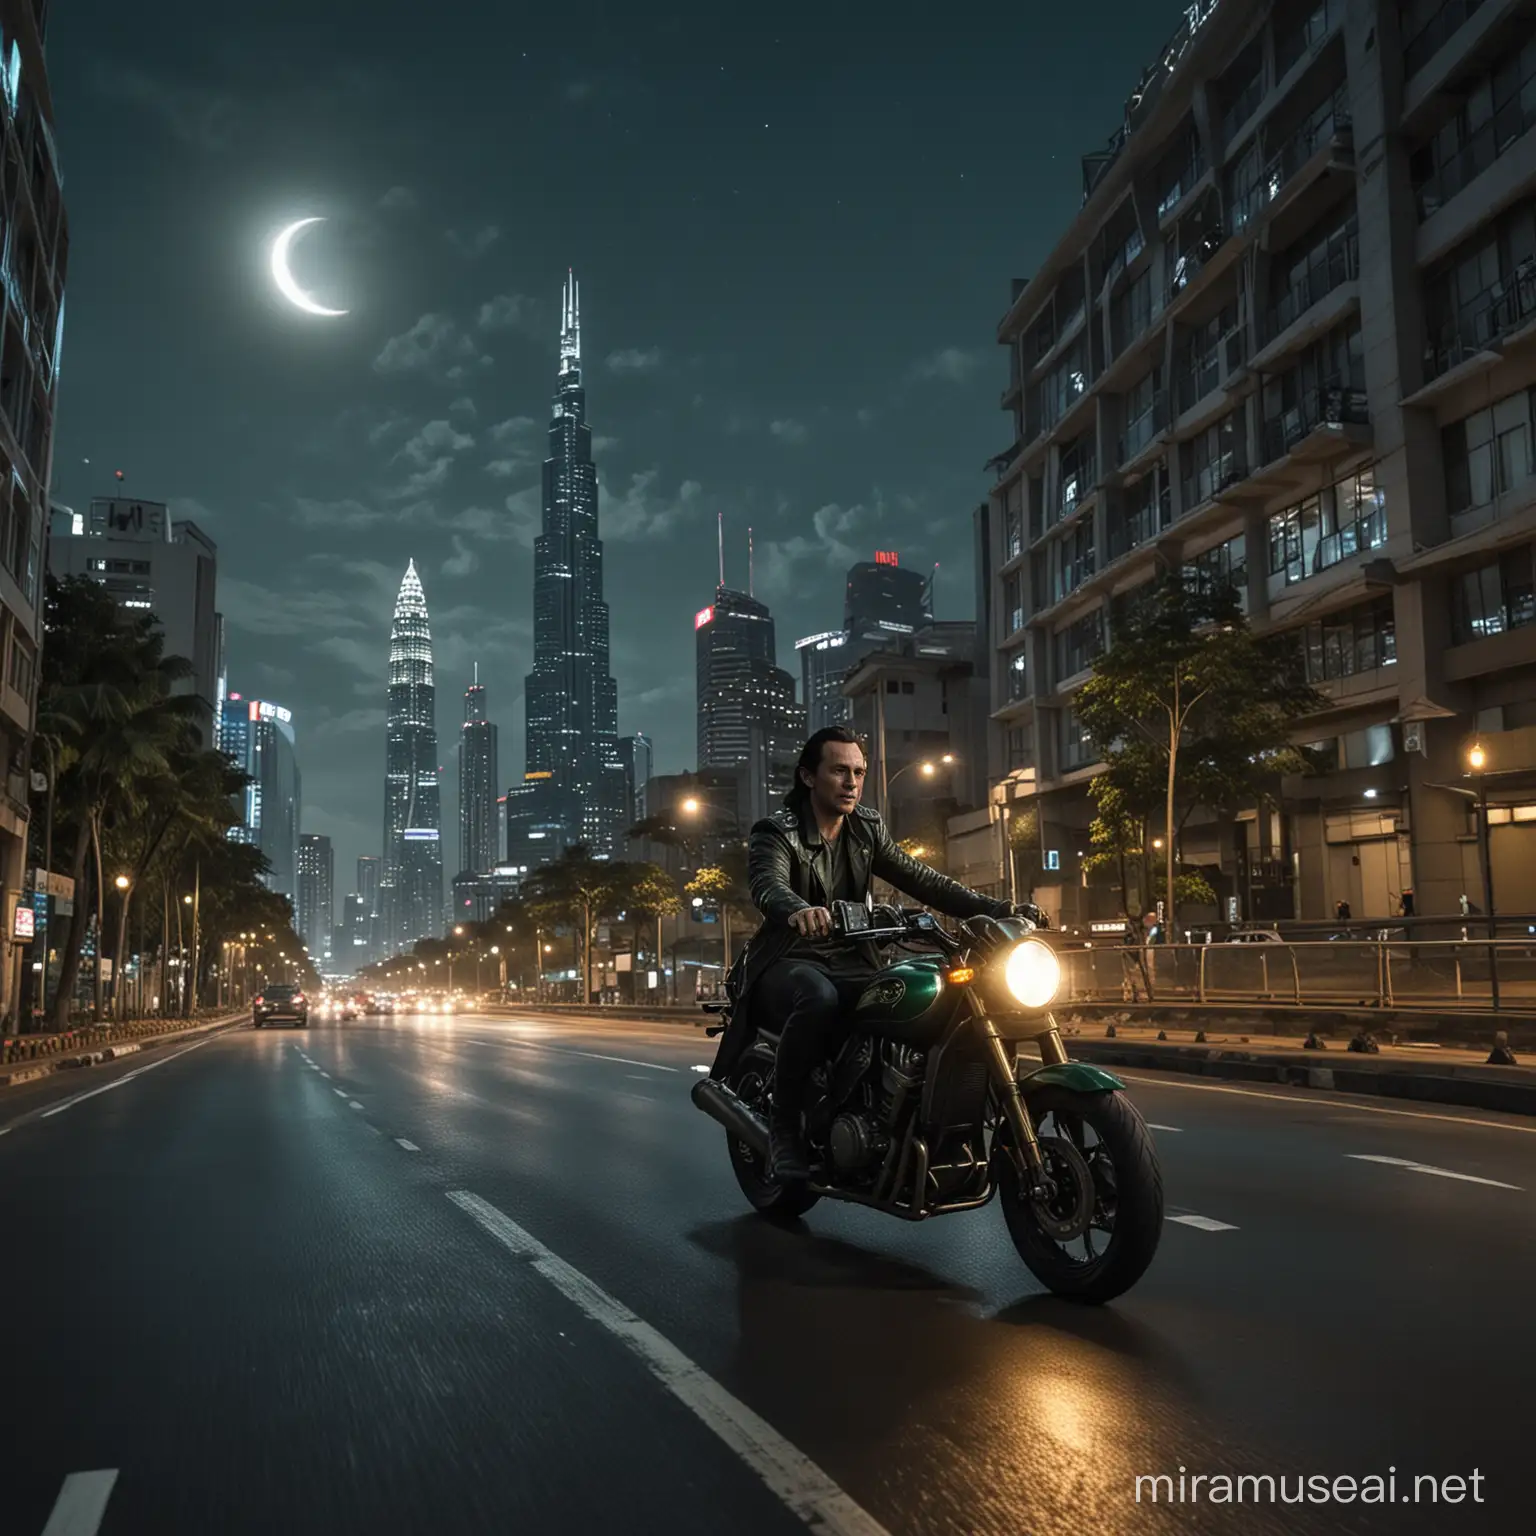 give me realistic image of loki laufeyson from marvel cinematic universe. in this picture he's riding a motorbike in jakarta road in the night. he ride a bike with tall building around them and there is a crescent moont behind. there is a busway transjakarta on the road and also mrt. he is enjoy the view of jakarta. the image is from the side with the camera slightly upwards.